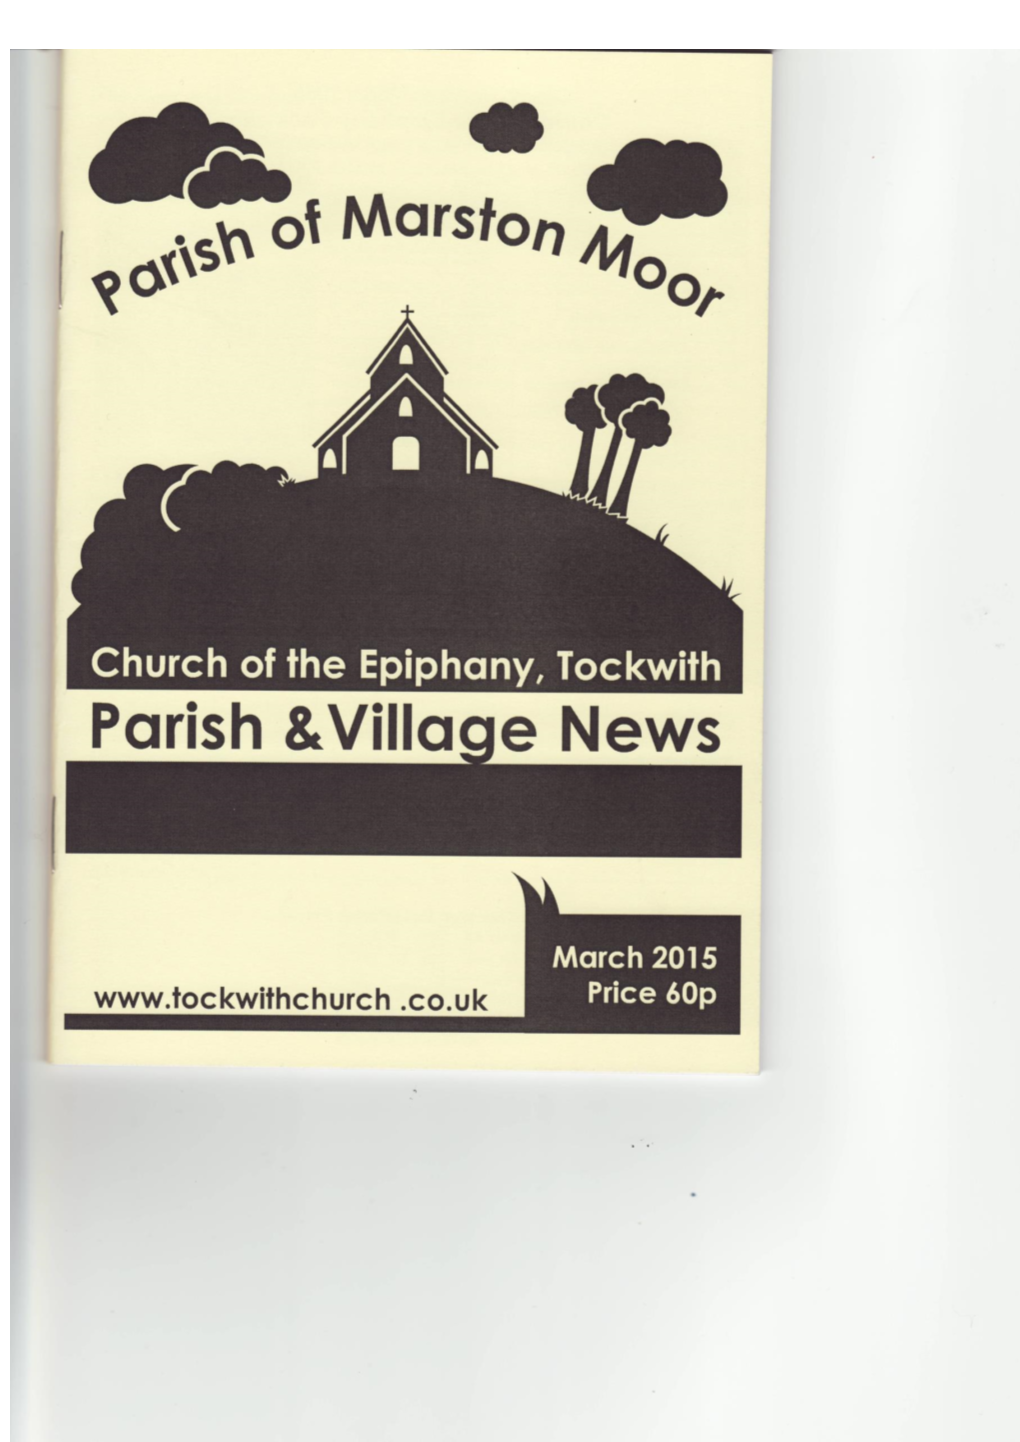 Church Services March 2015 Church of the Epiphany Tockwith a Member Church of the Parish of Marston Moor